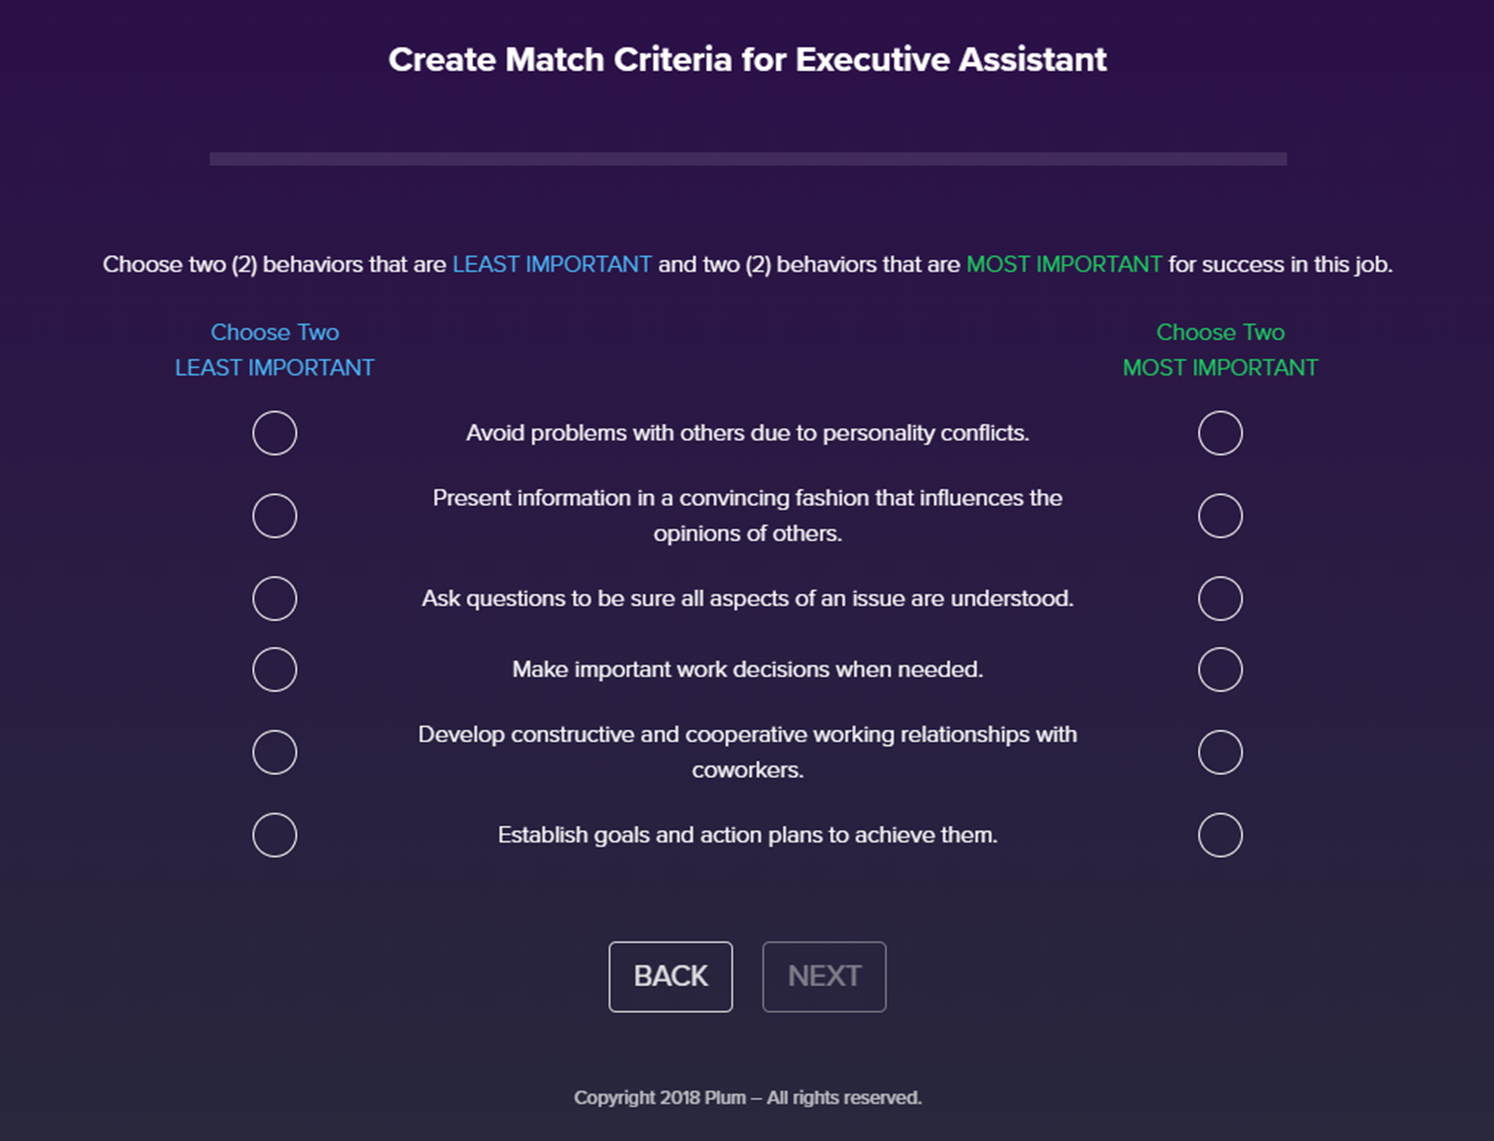 The Match Criteria Survey determines the talents needed for the role